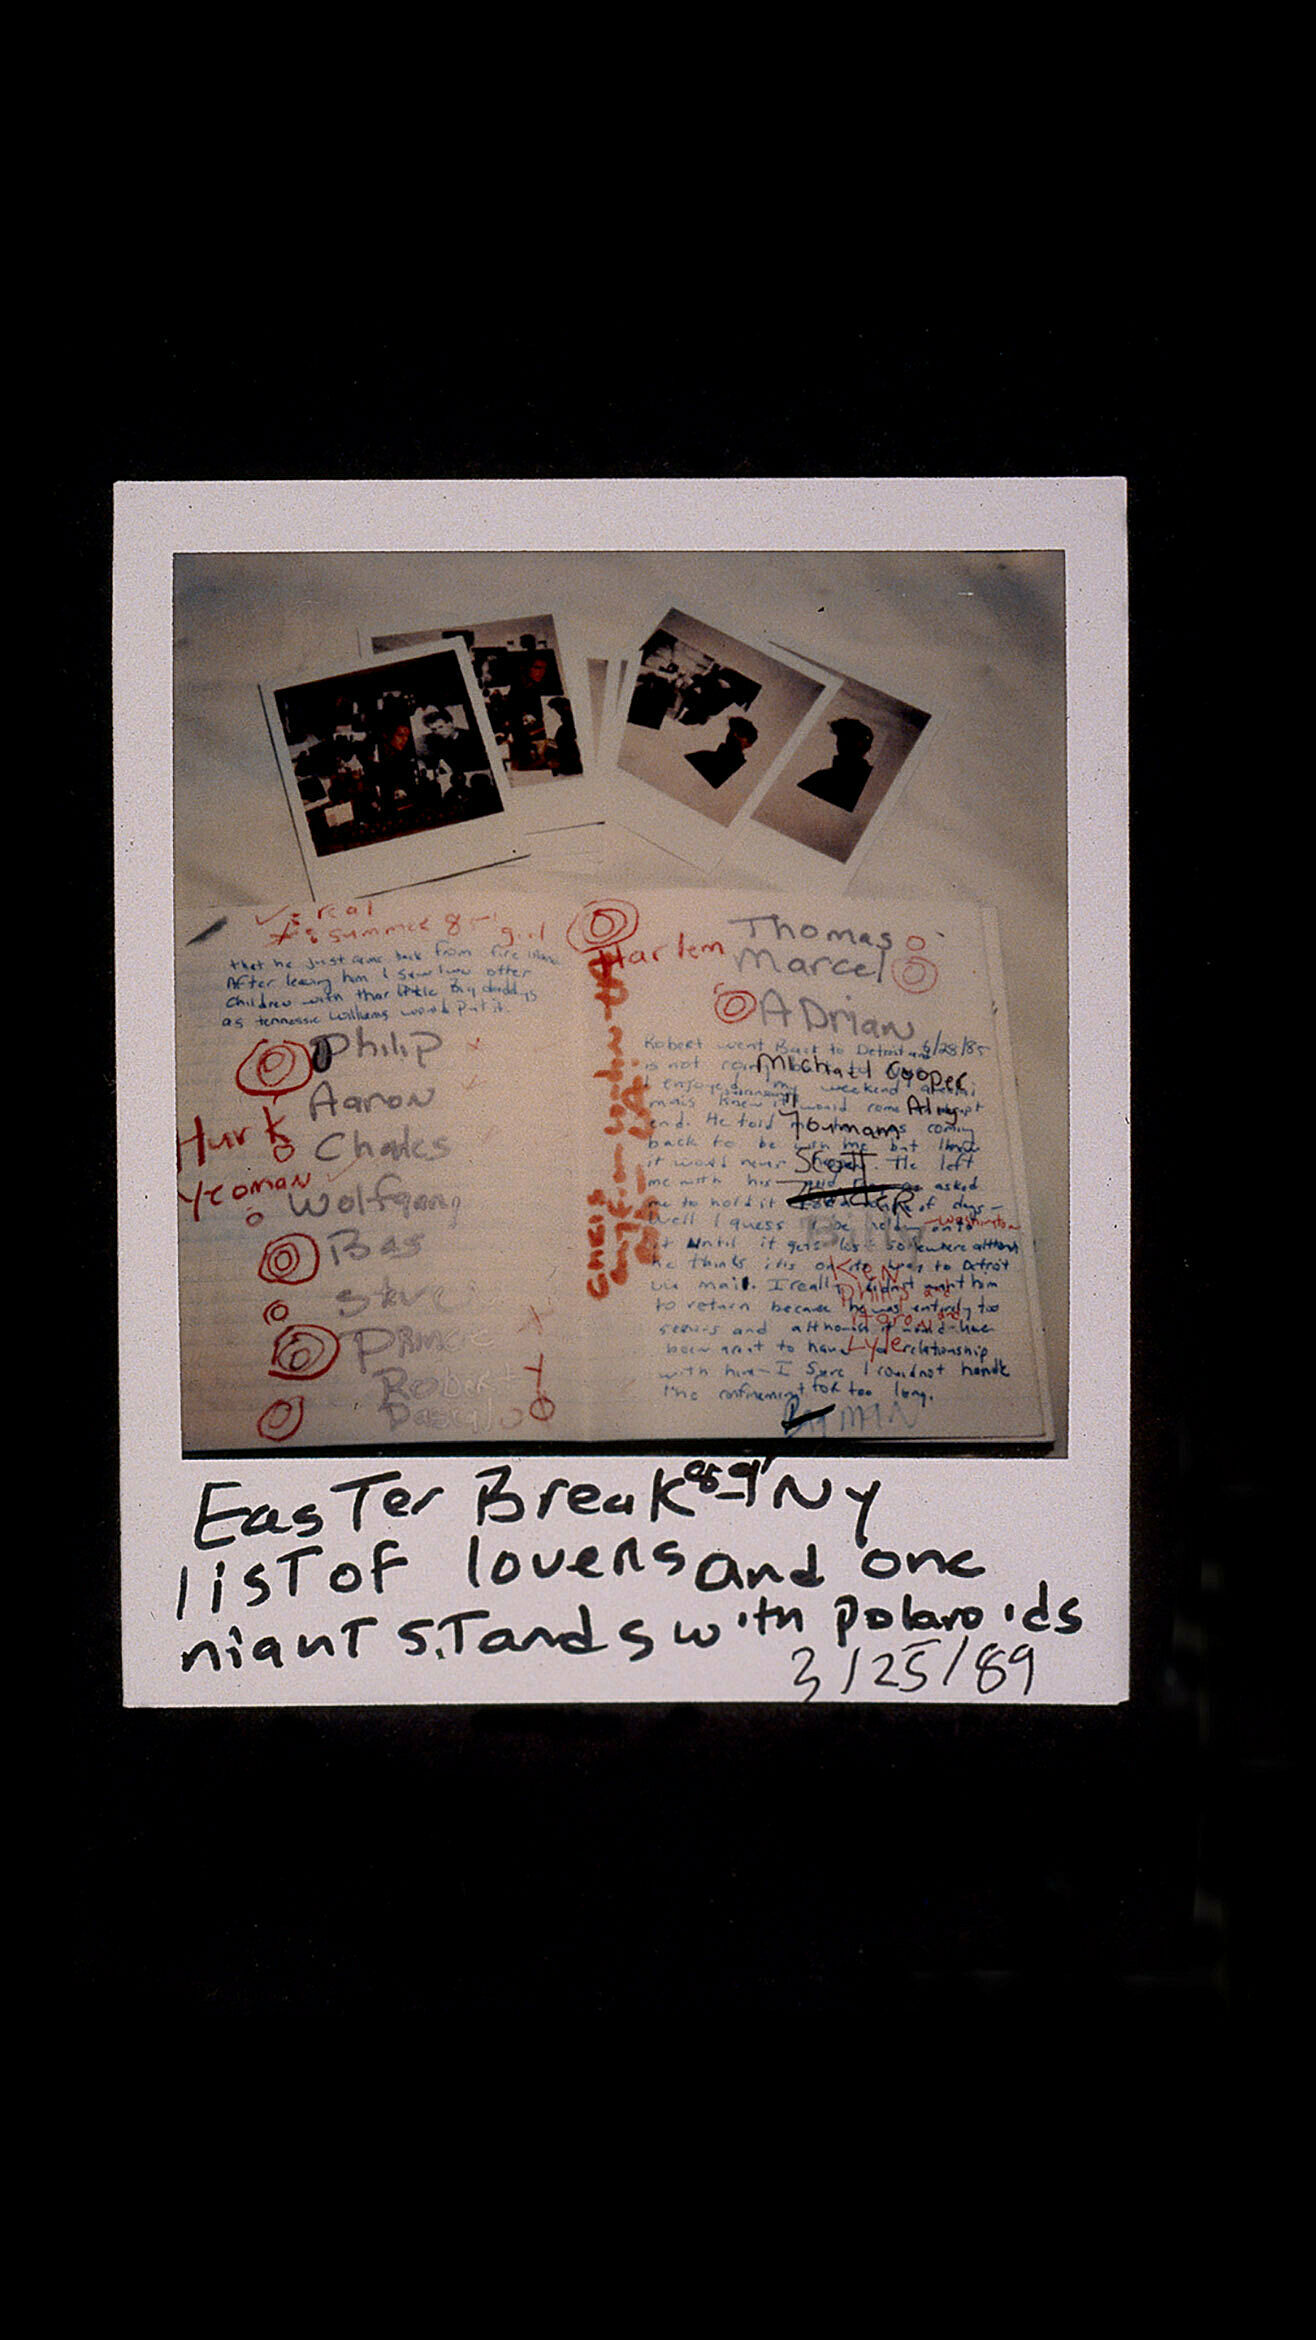 Polaroid photos spread on a handwritten journal page with names and notes, captioned "Easter Break 89' NY list of lovers and one night stands with Polaroids 3/25/89."